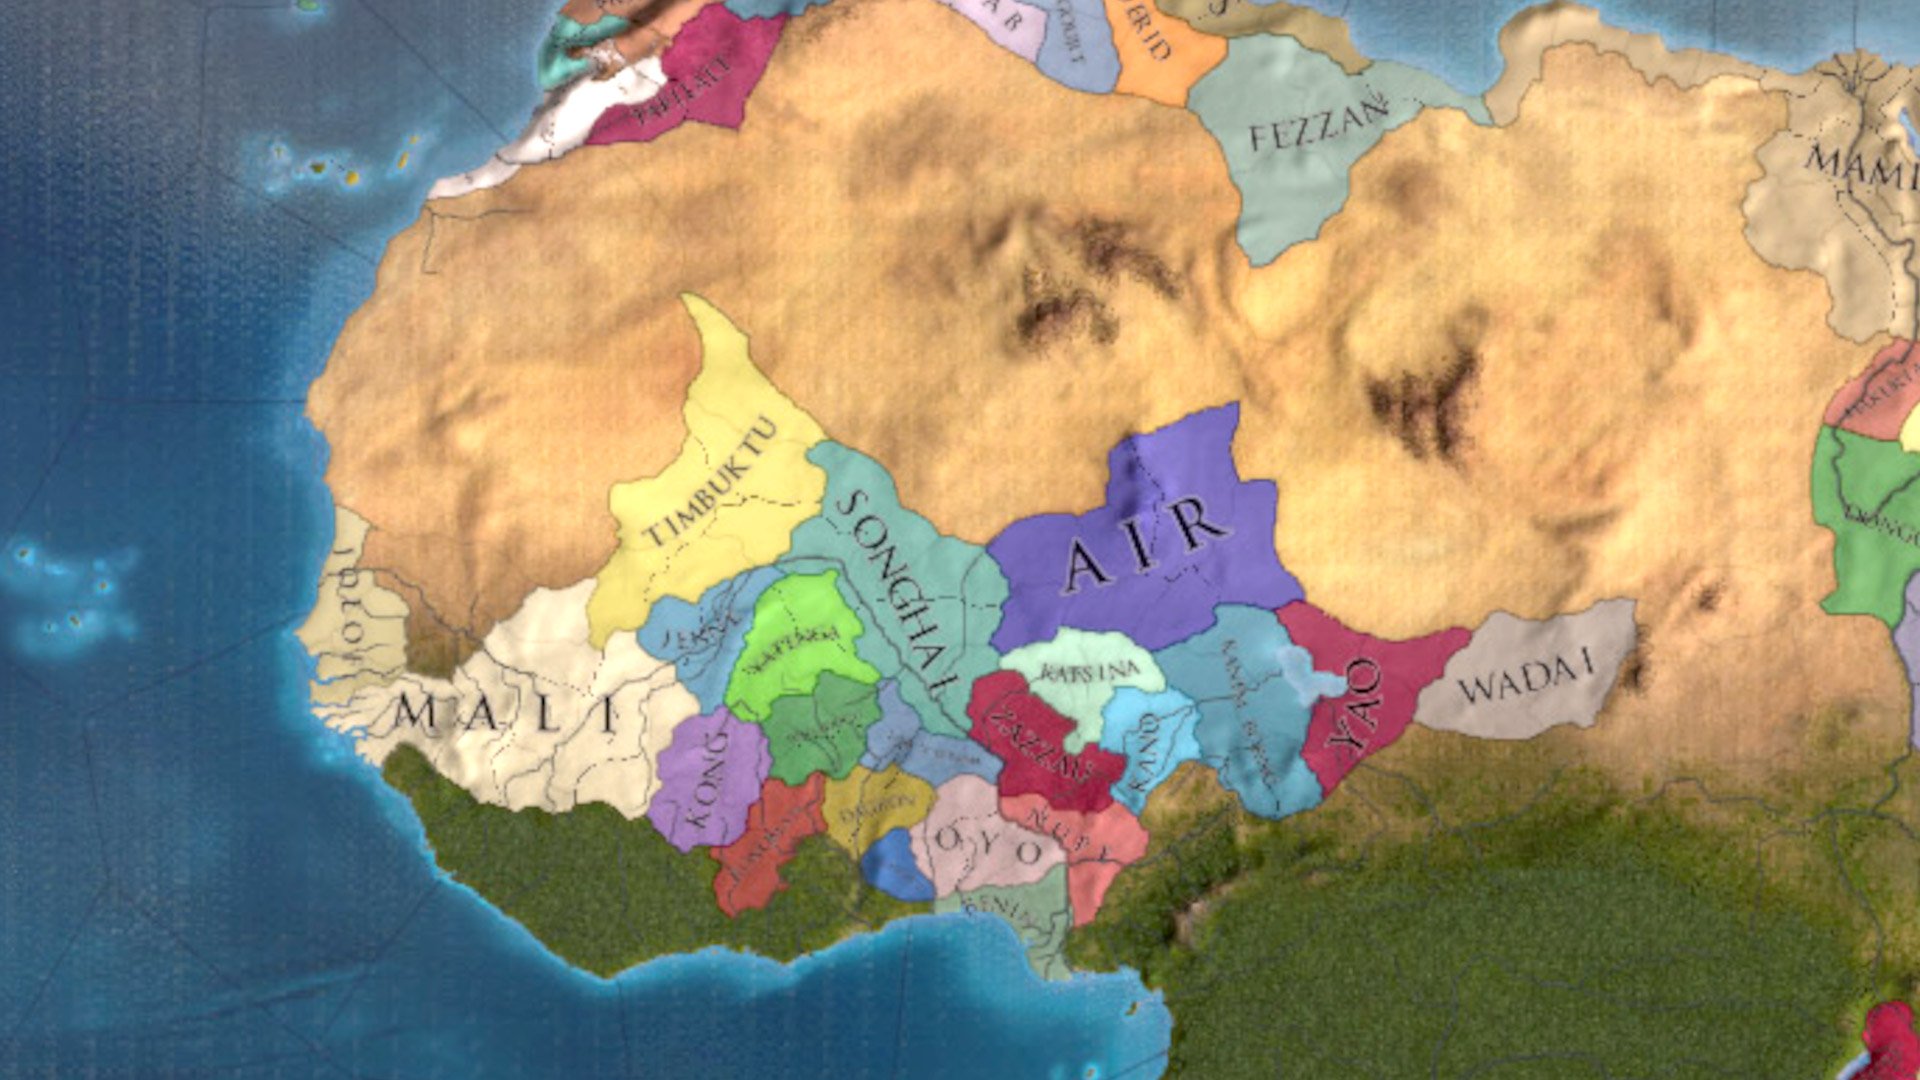 The best Europa Universalis 4 achievements - EU4 screenshot showing the in game map of Africa including Songhai